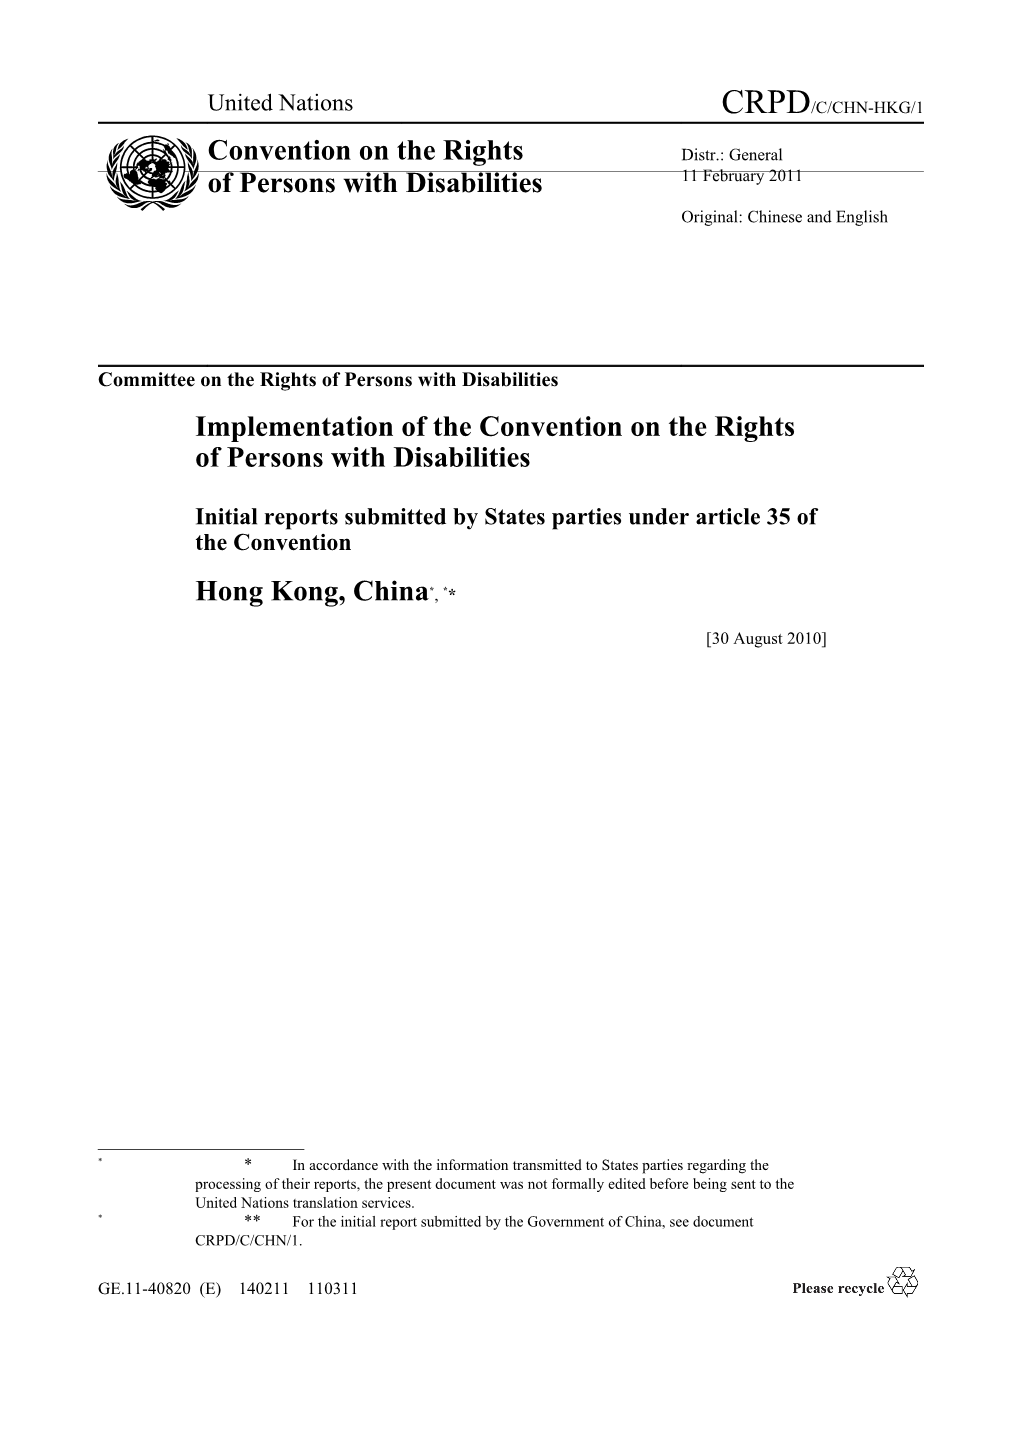 Committee on the Rights of Persons with Disabilities